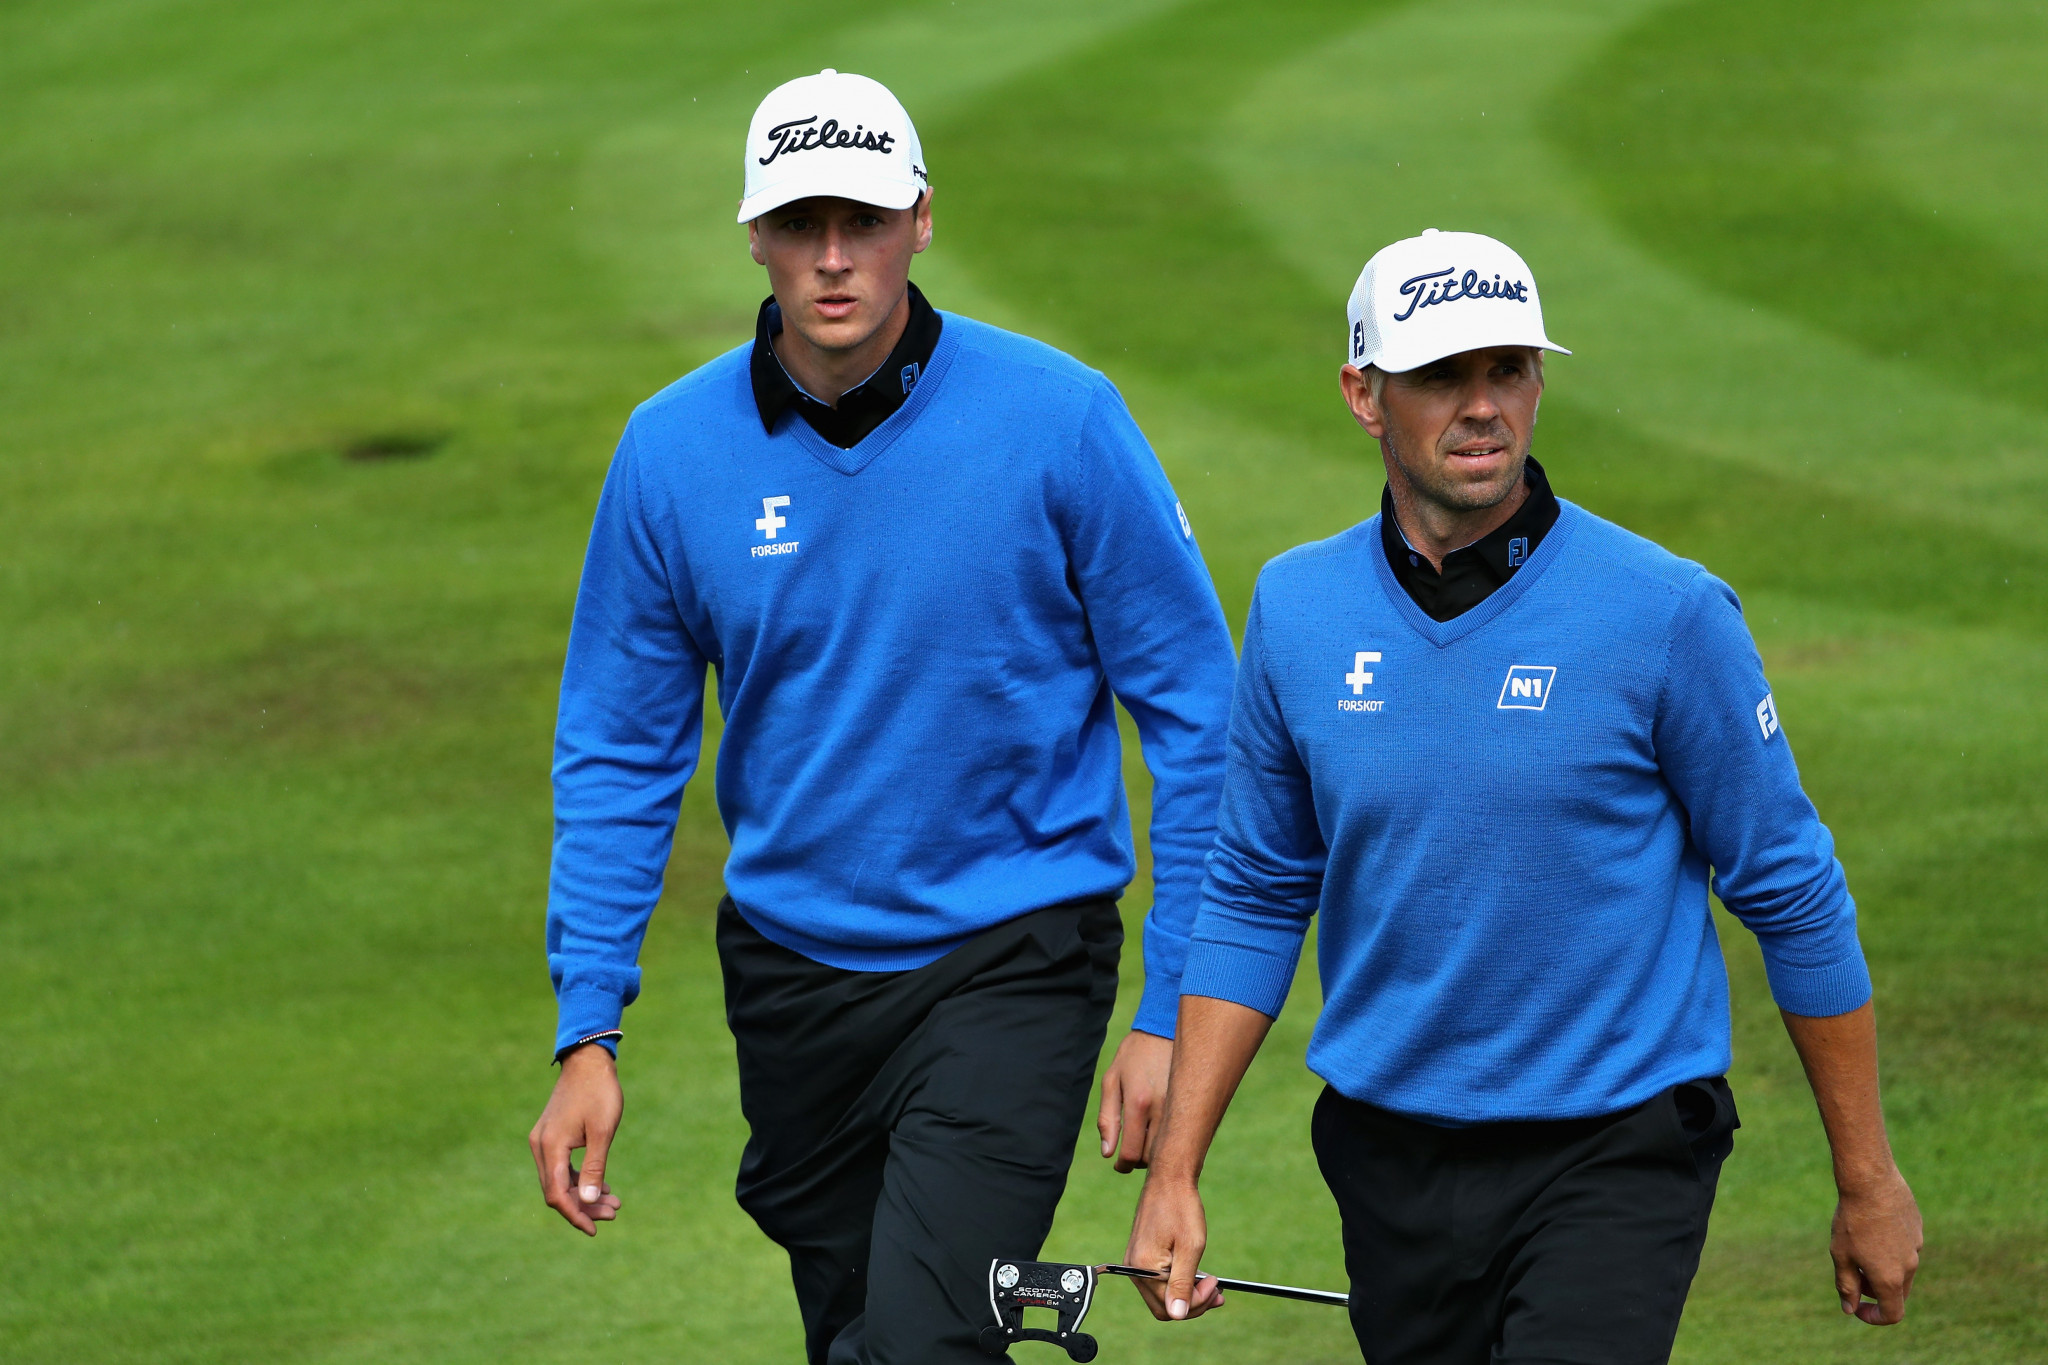 Iceland's Birgir Hafthorsson and Axel Boasson were among the pairings to progress through to the men's semi-finals in the European Golf Team Championships ©Getty Images